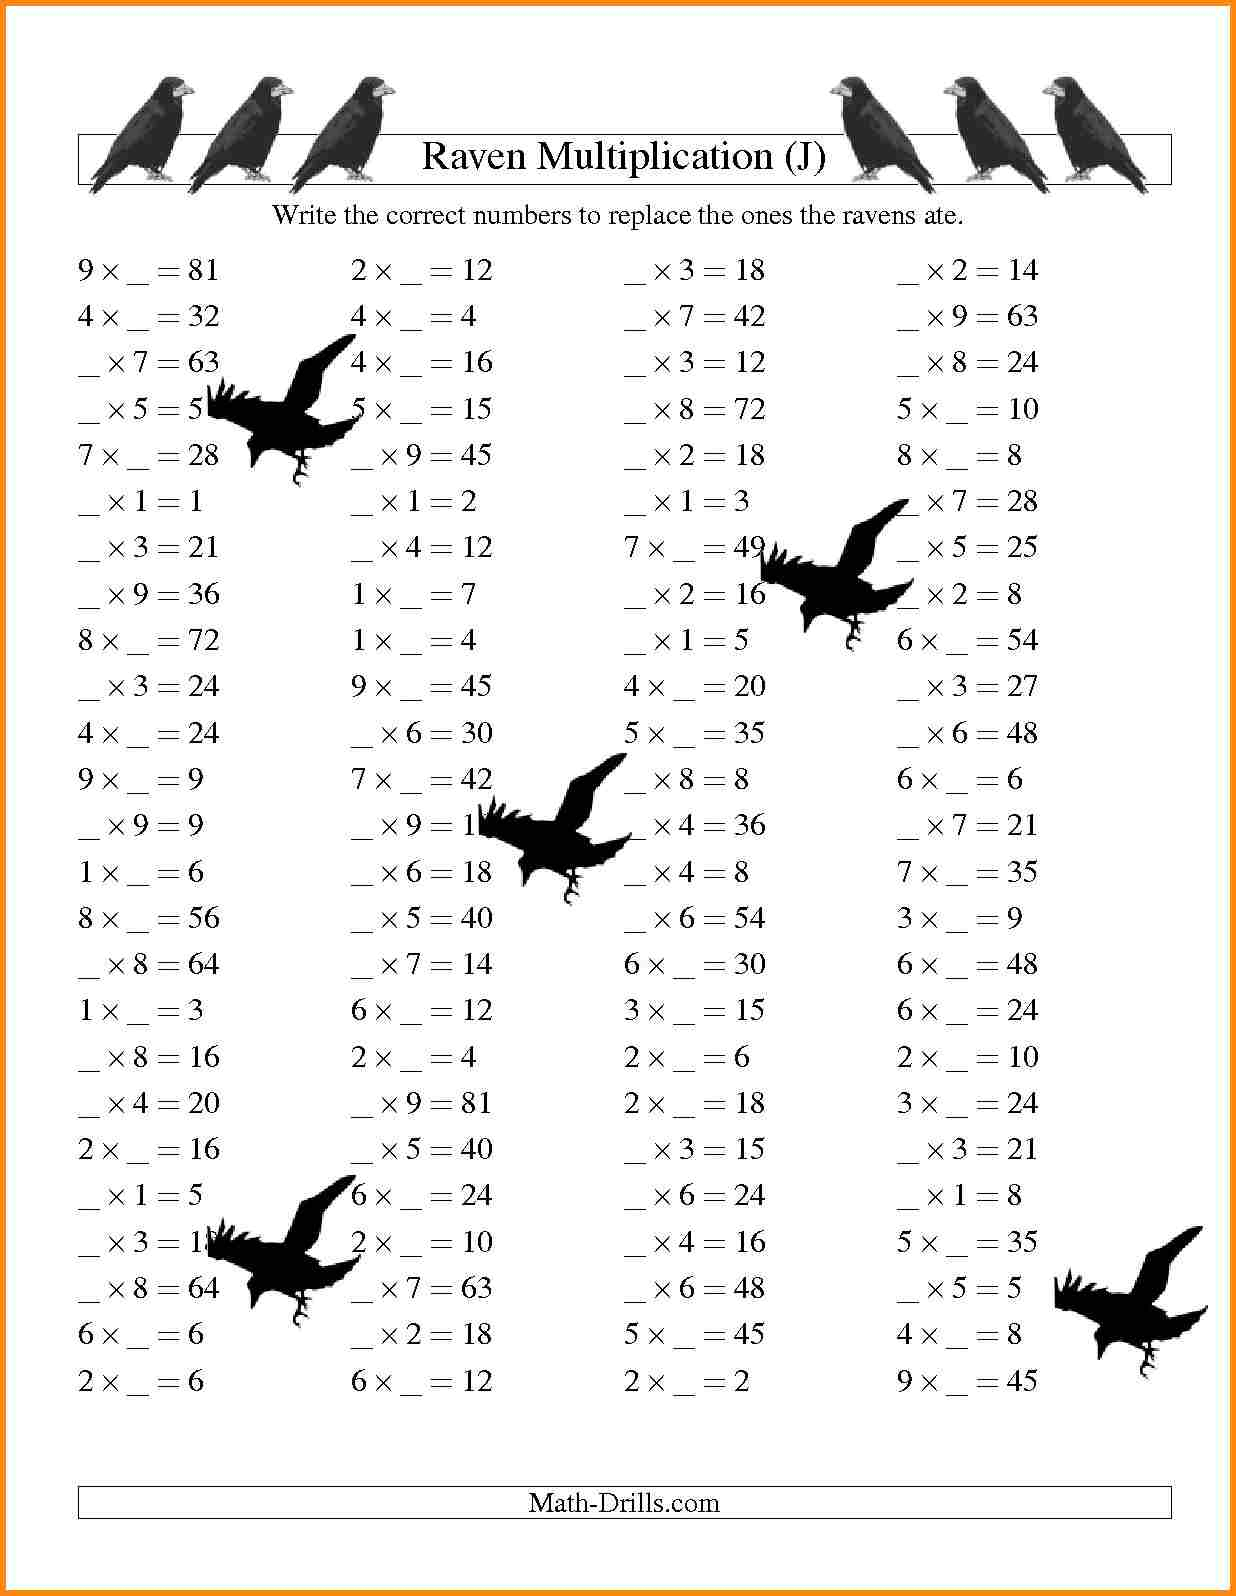 Printable Halloween Worksheets For Middle School | Halloween Arts - Free Printable Halloween Worksheets